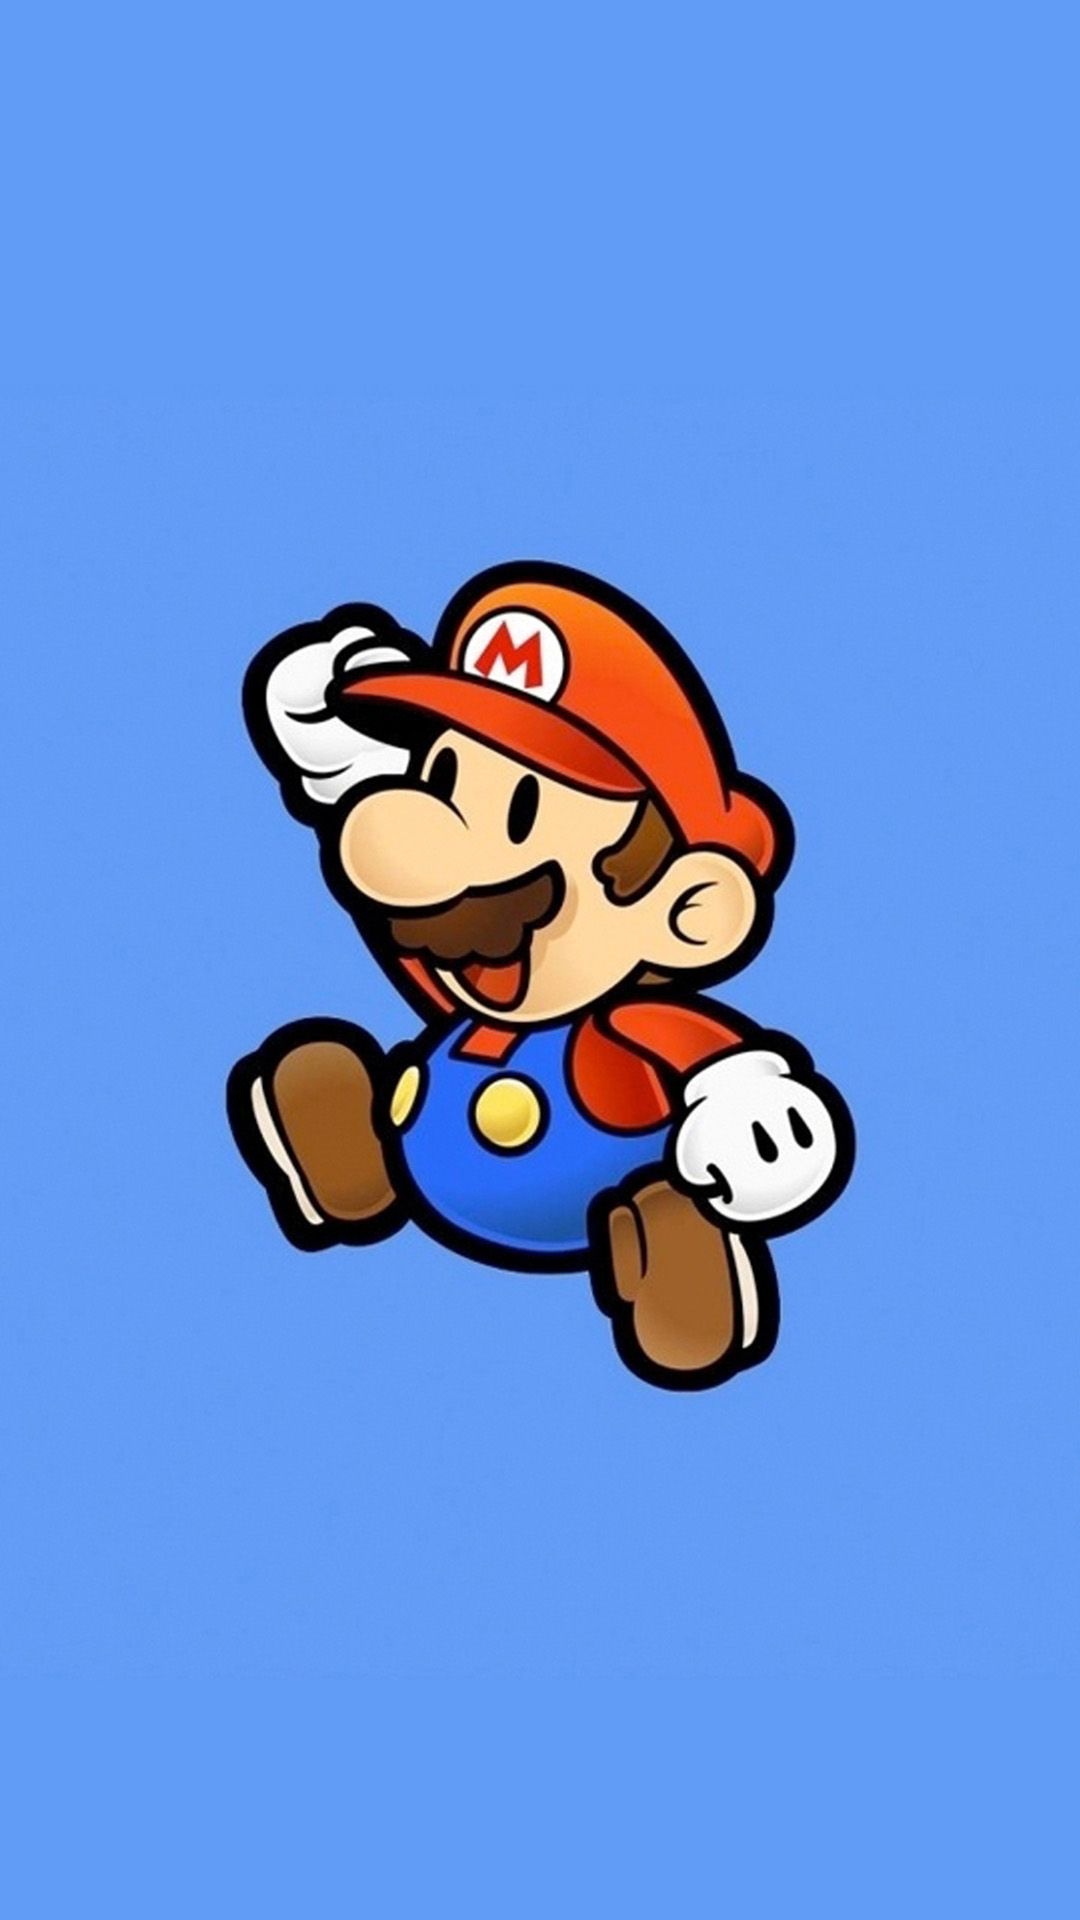 Super Mario iPhone wallpapers, Mobile gaming nostalgia, Mario and friends, On-the-go fun, 1080x1920 Full HD Phone